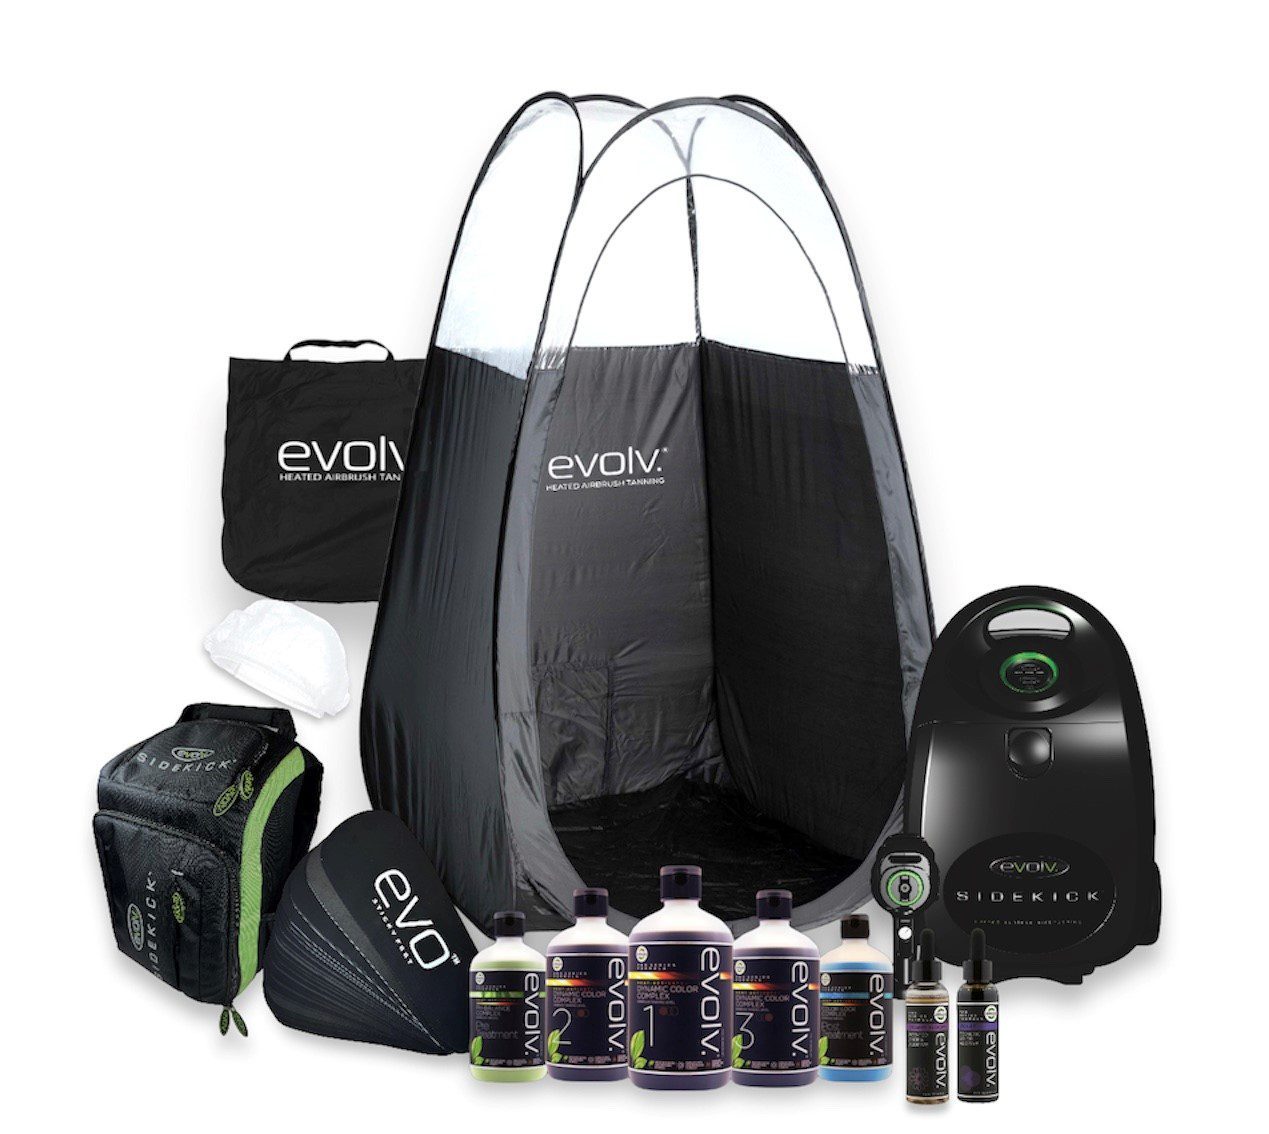 Full Sidekick Business Kit with Pop Up Tent and Evolv Products